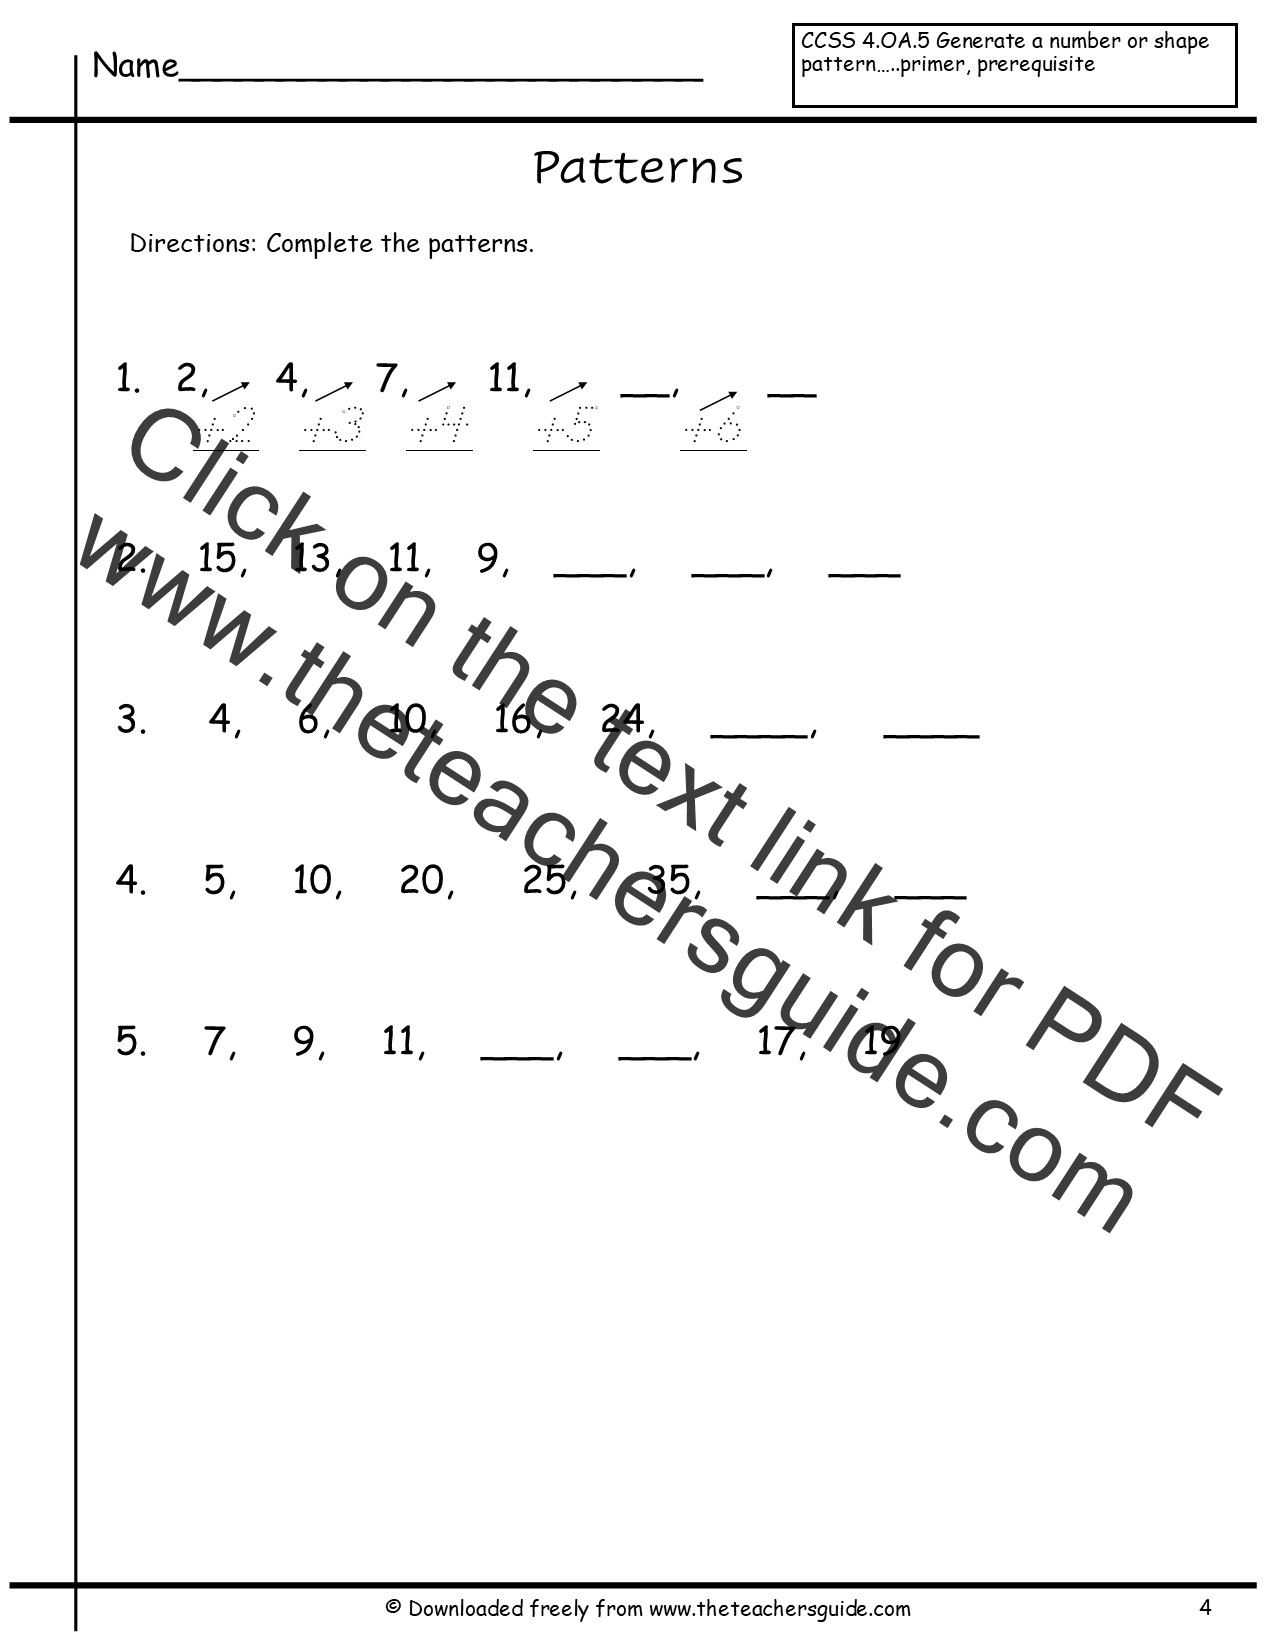 Patterns Worksheets from The Teacher's Guide